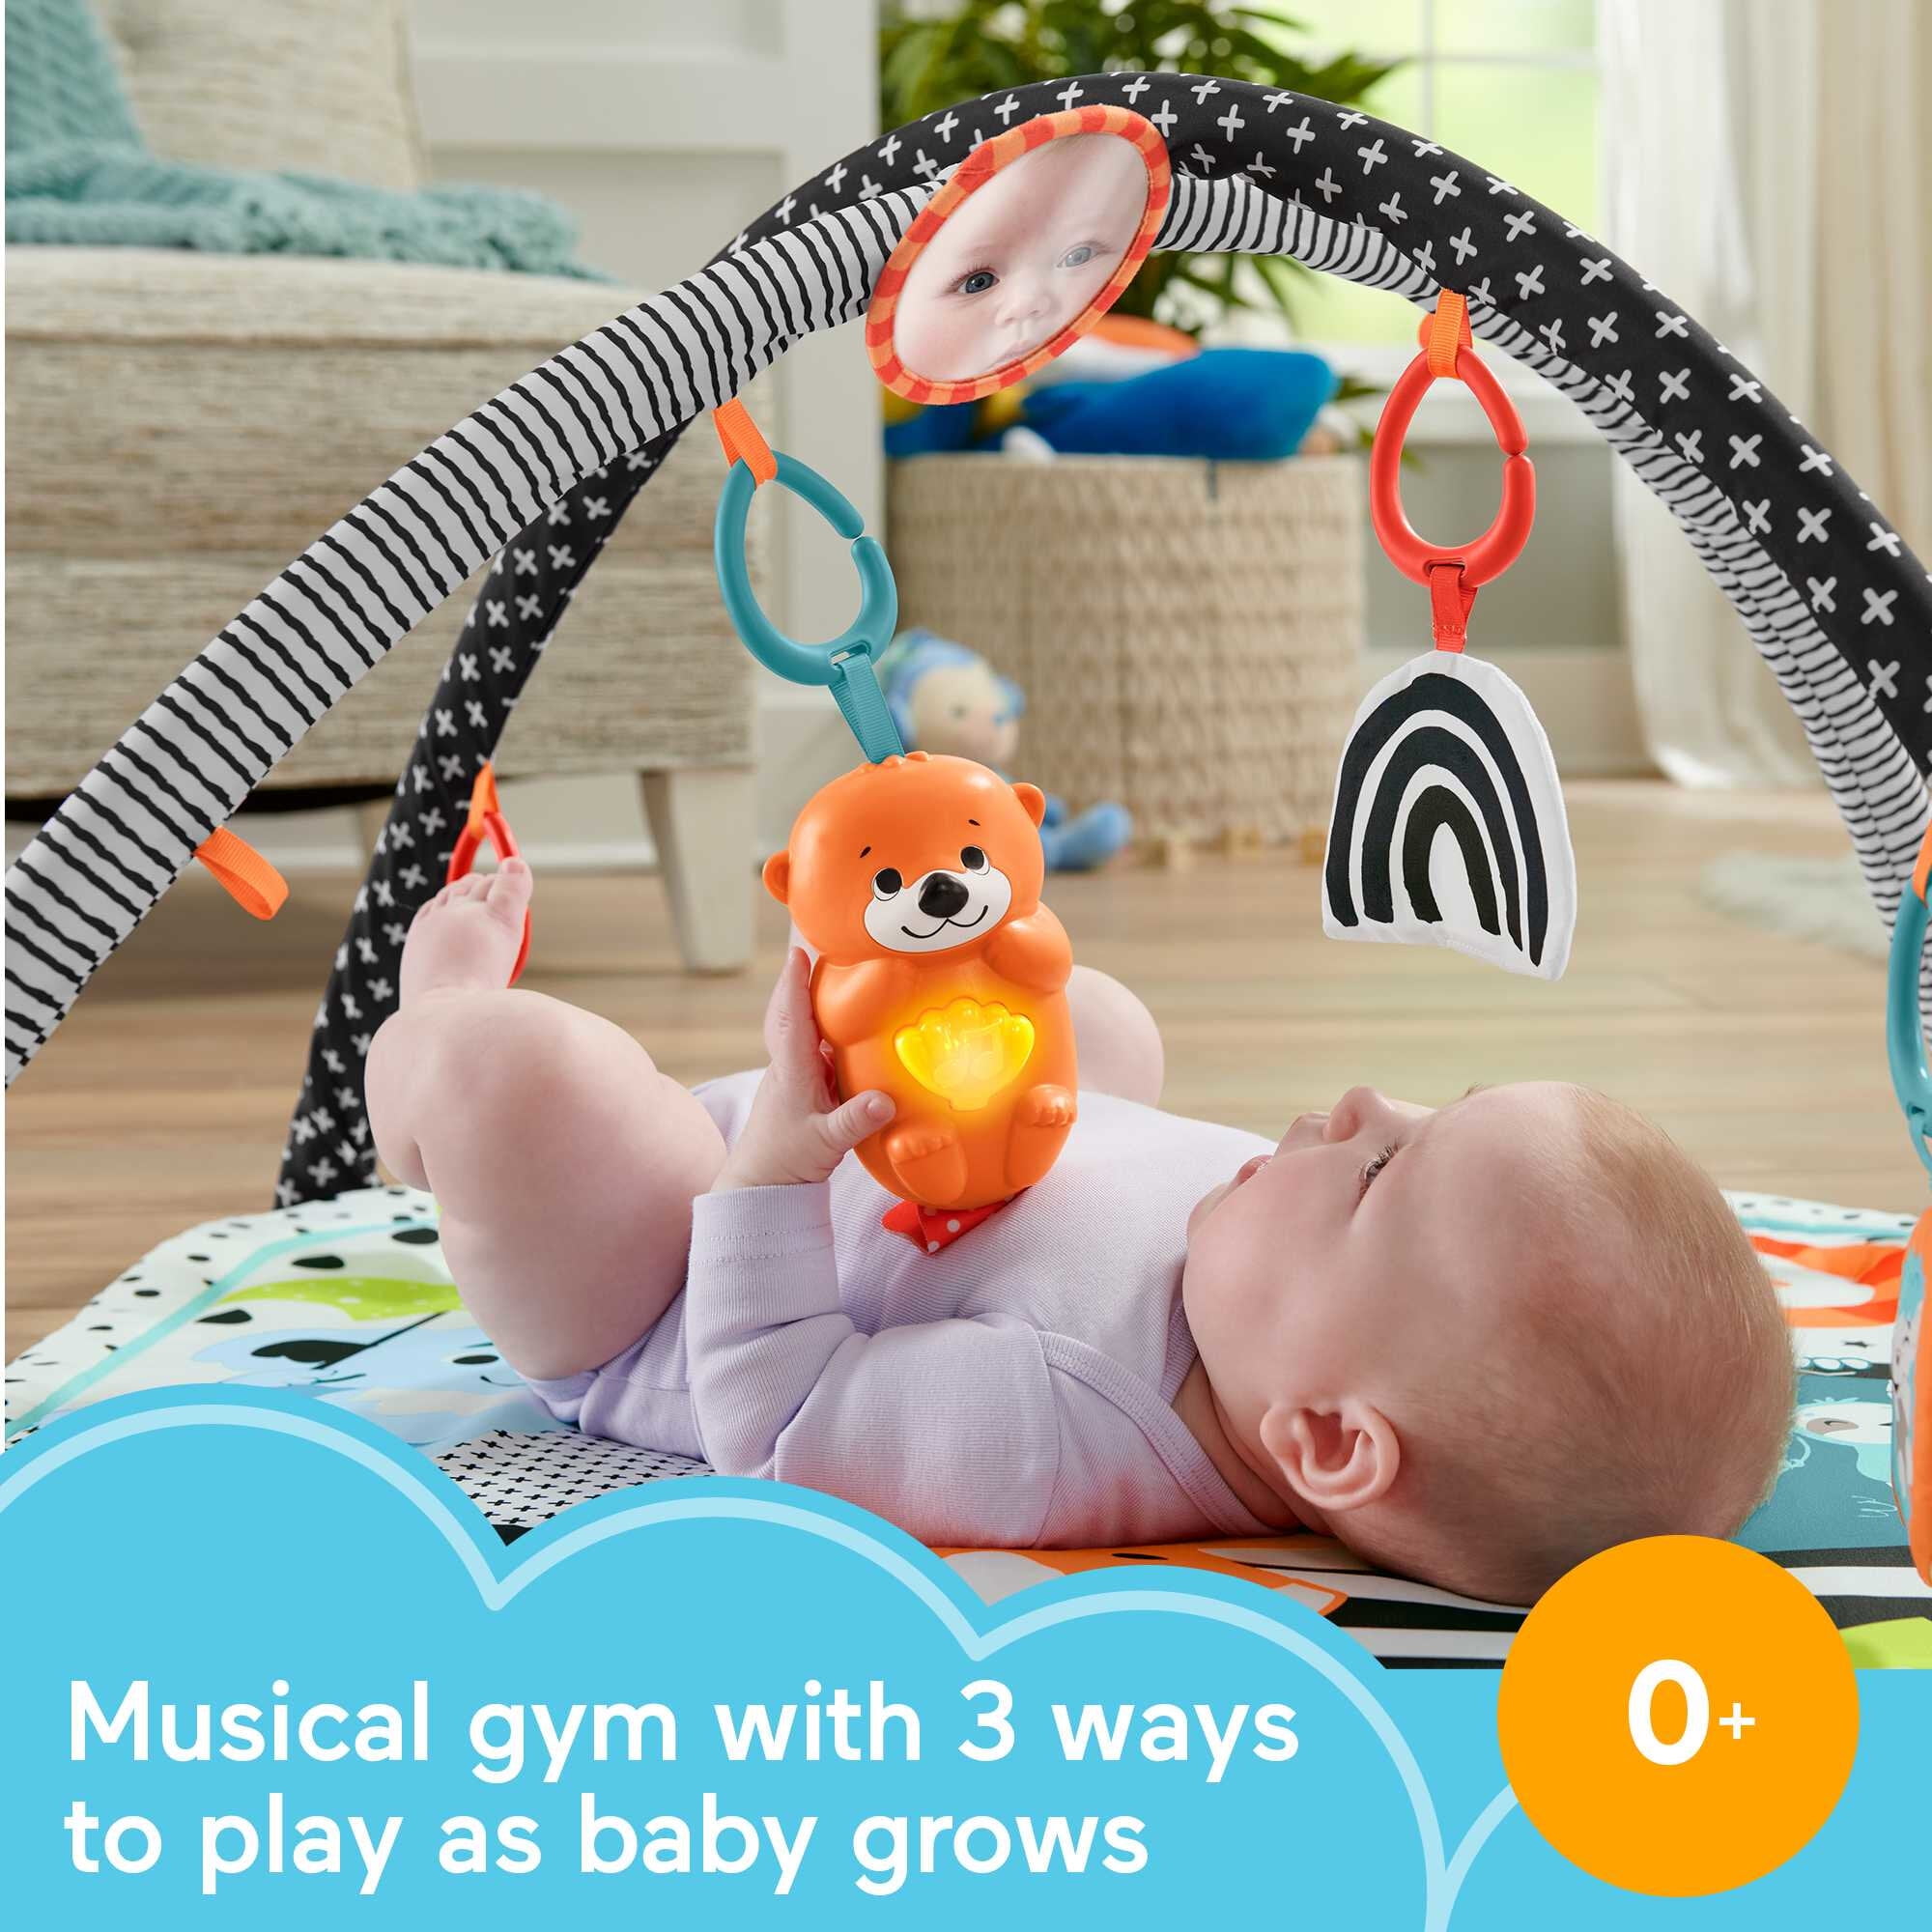 Fisher-Price 3-in-1 Baby Gym Playmat with Sensory Toys Lights and Sounds, Music Glow and Grow Gym - 2